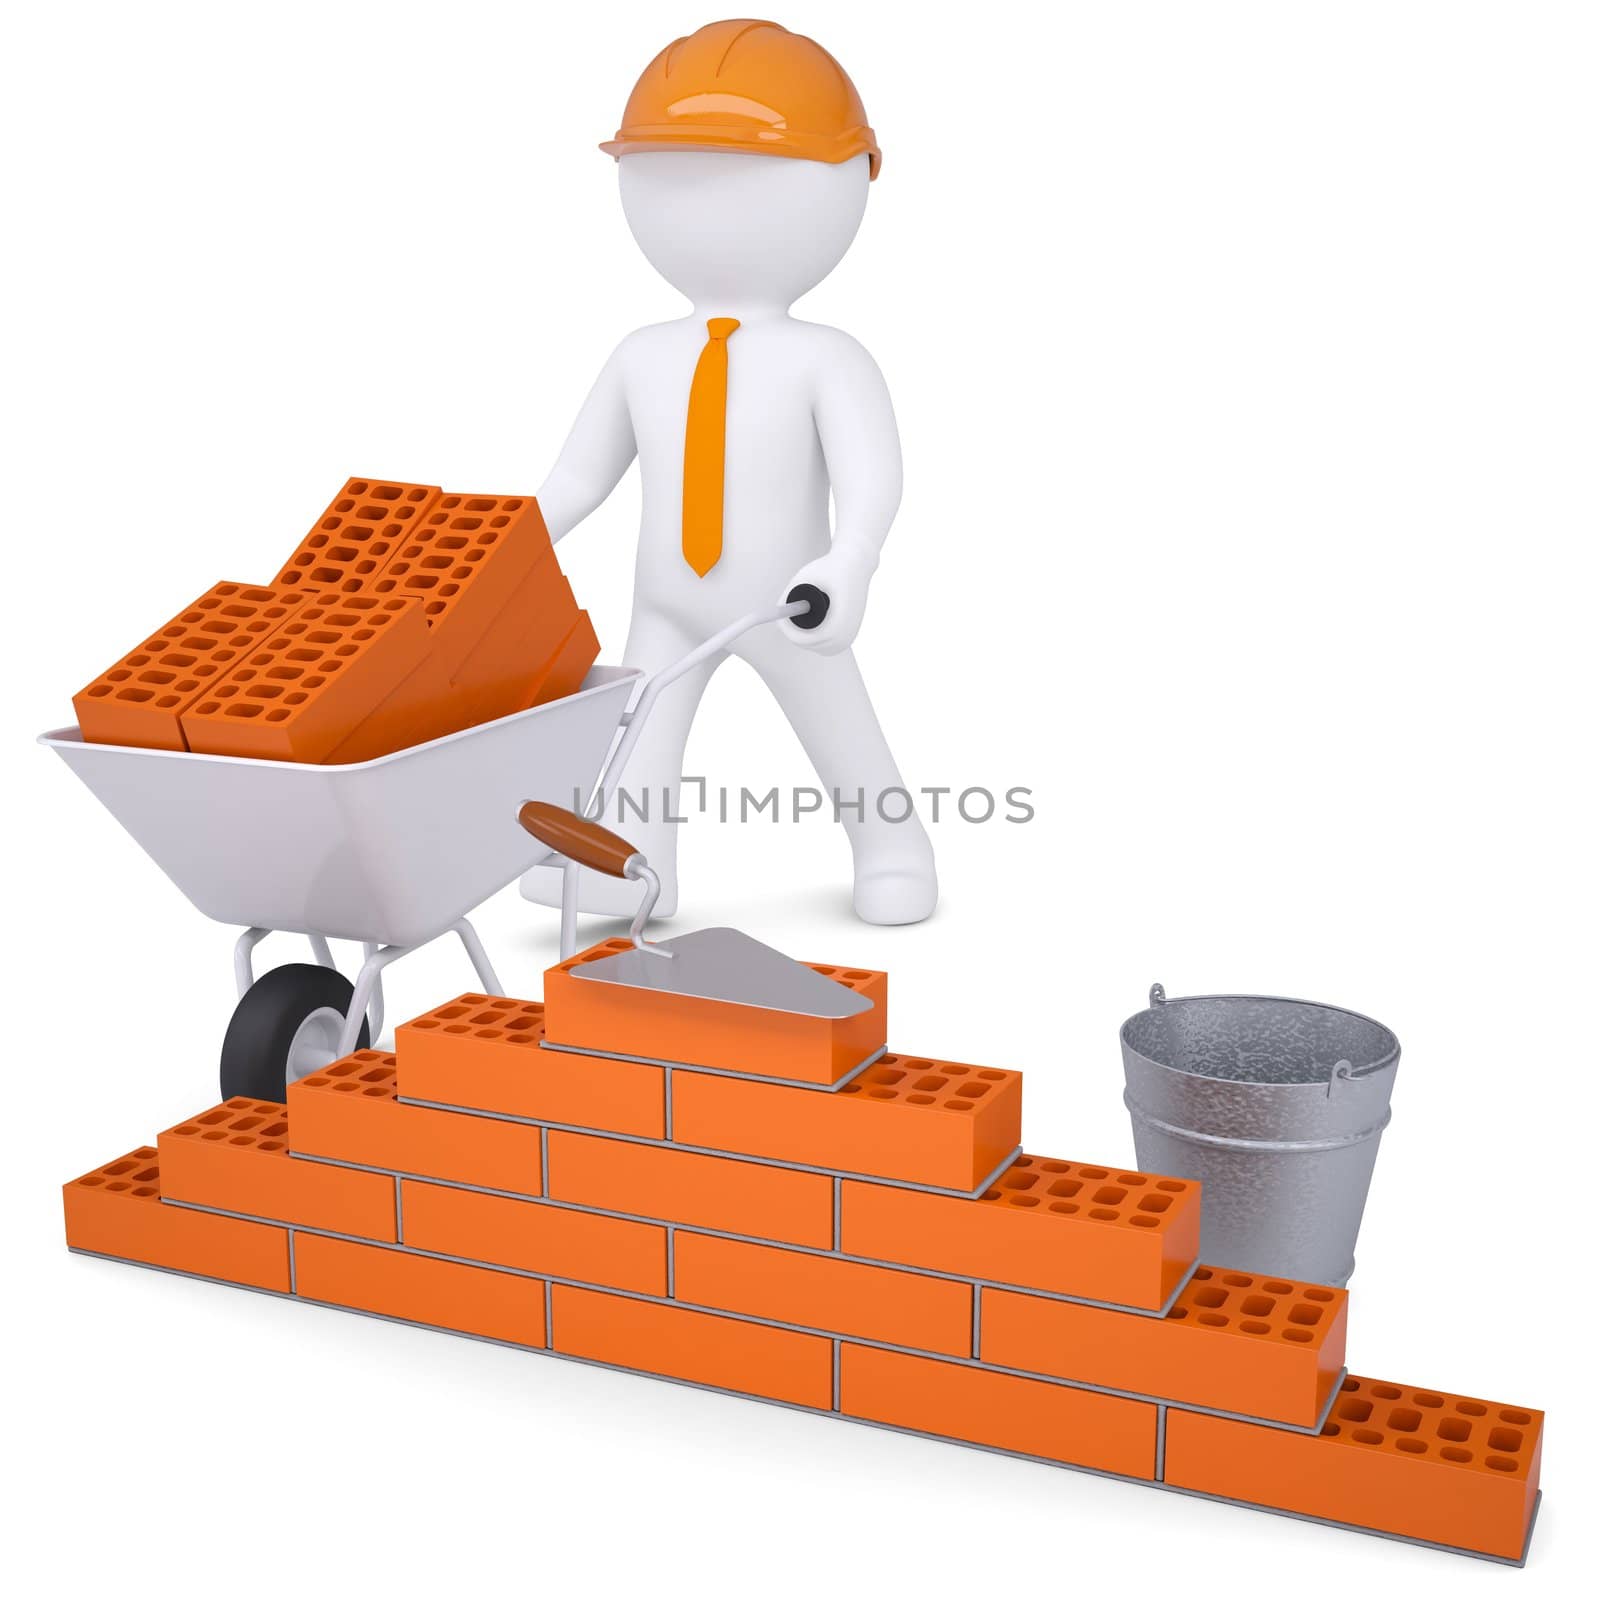 3d white man in a helmet builds a wall. Isolated render on a white background